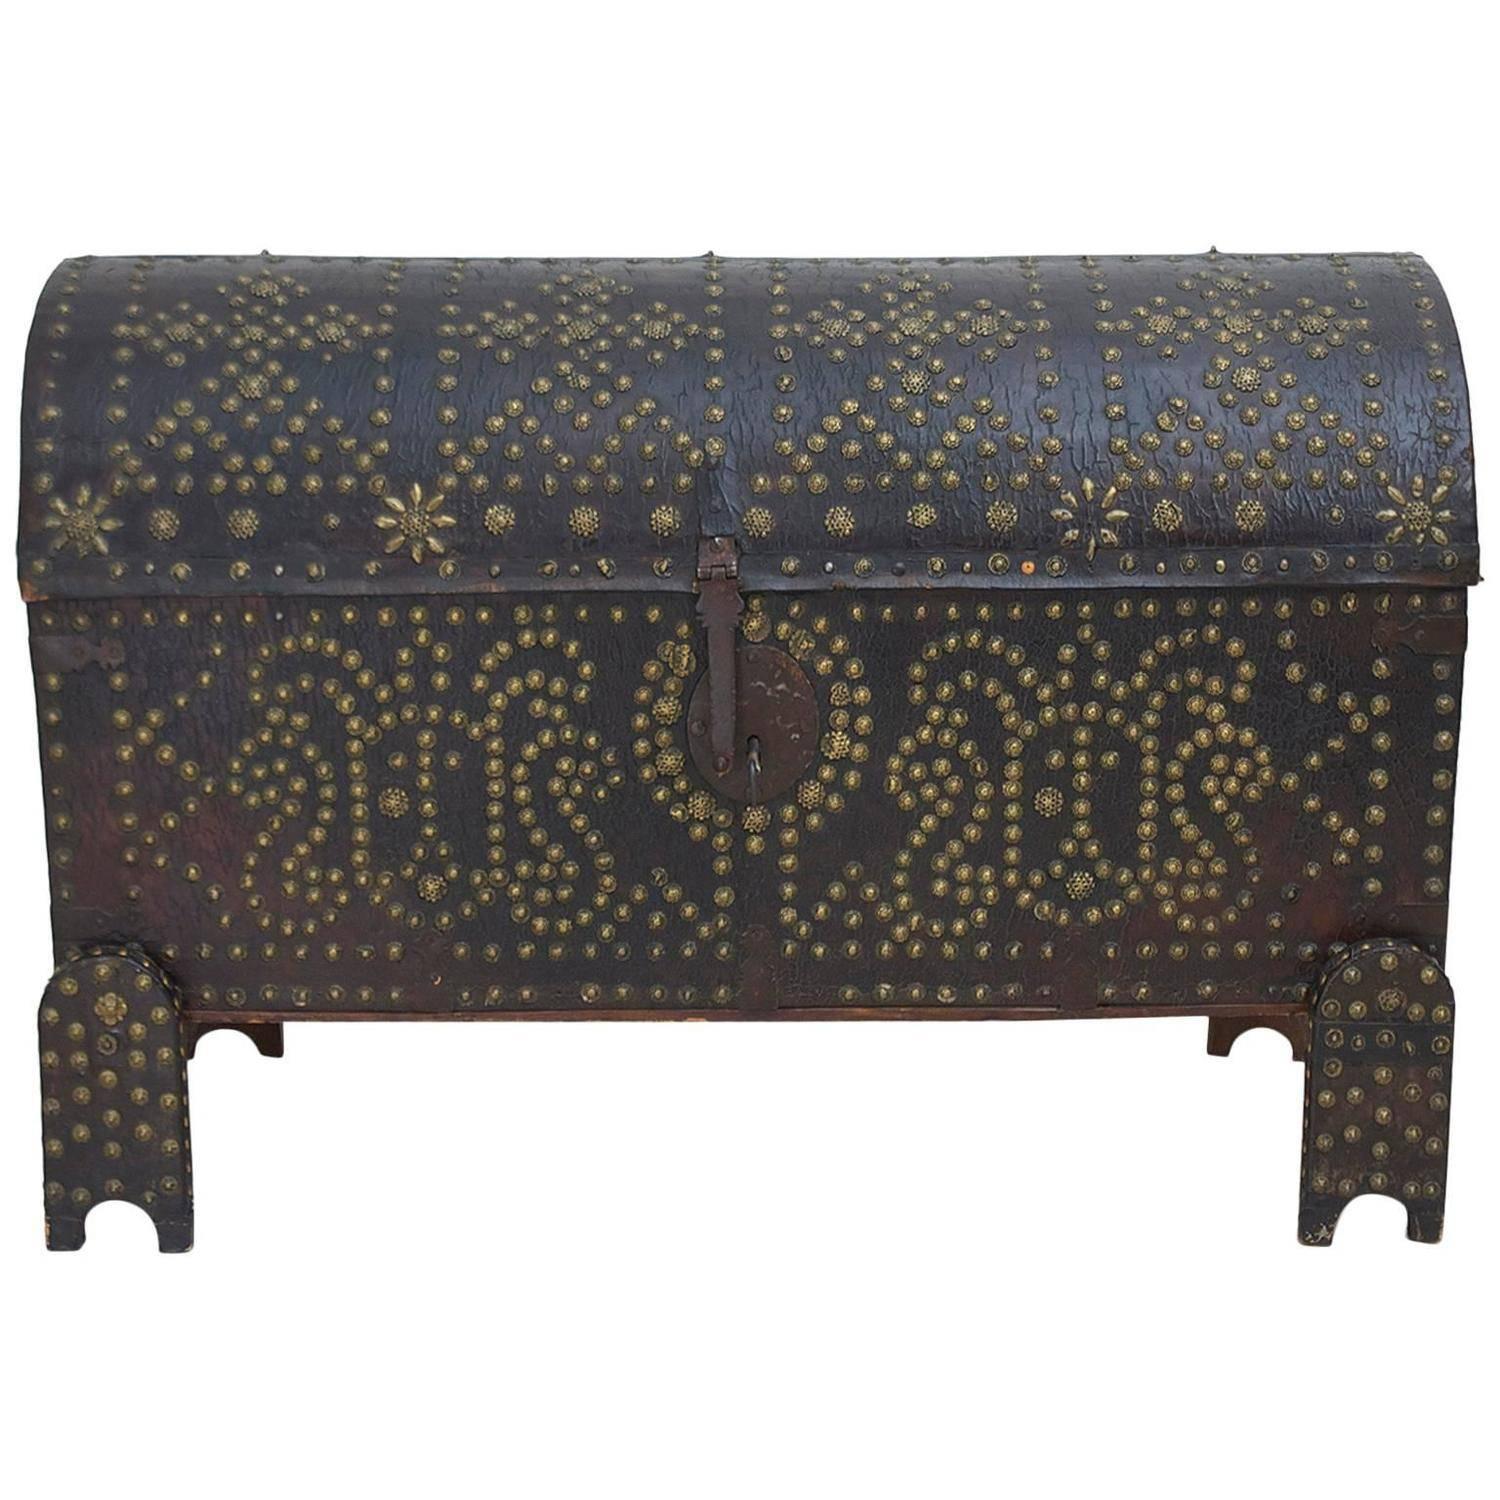 18th Century Spanish Leather-Bound Chest on Stand with Decorative Nailheads